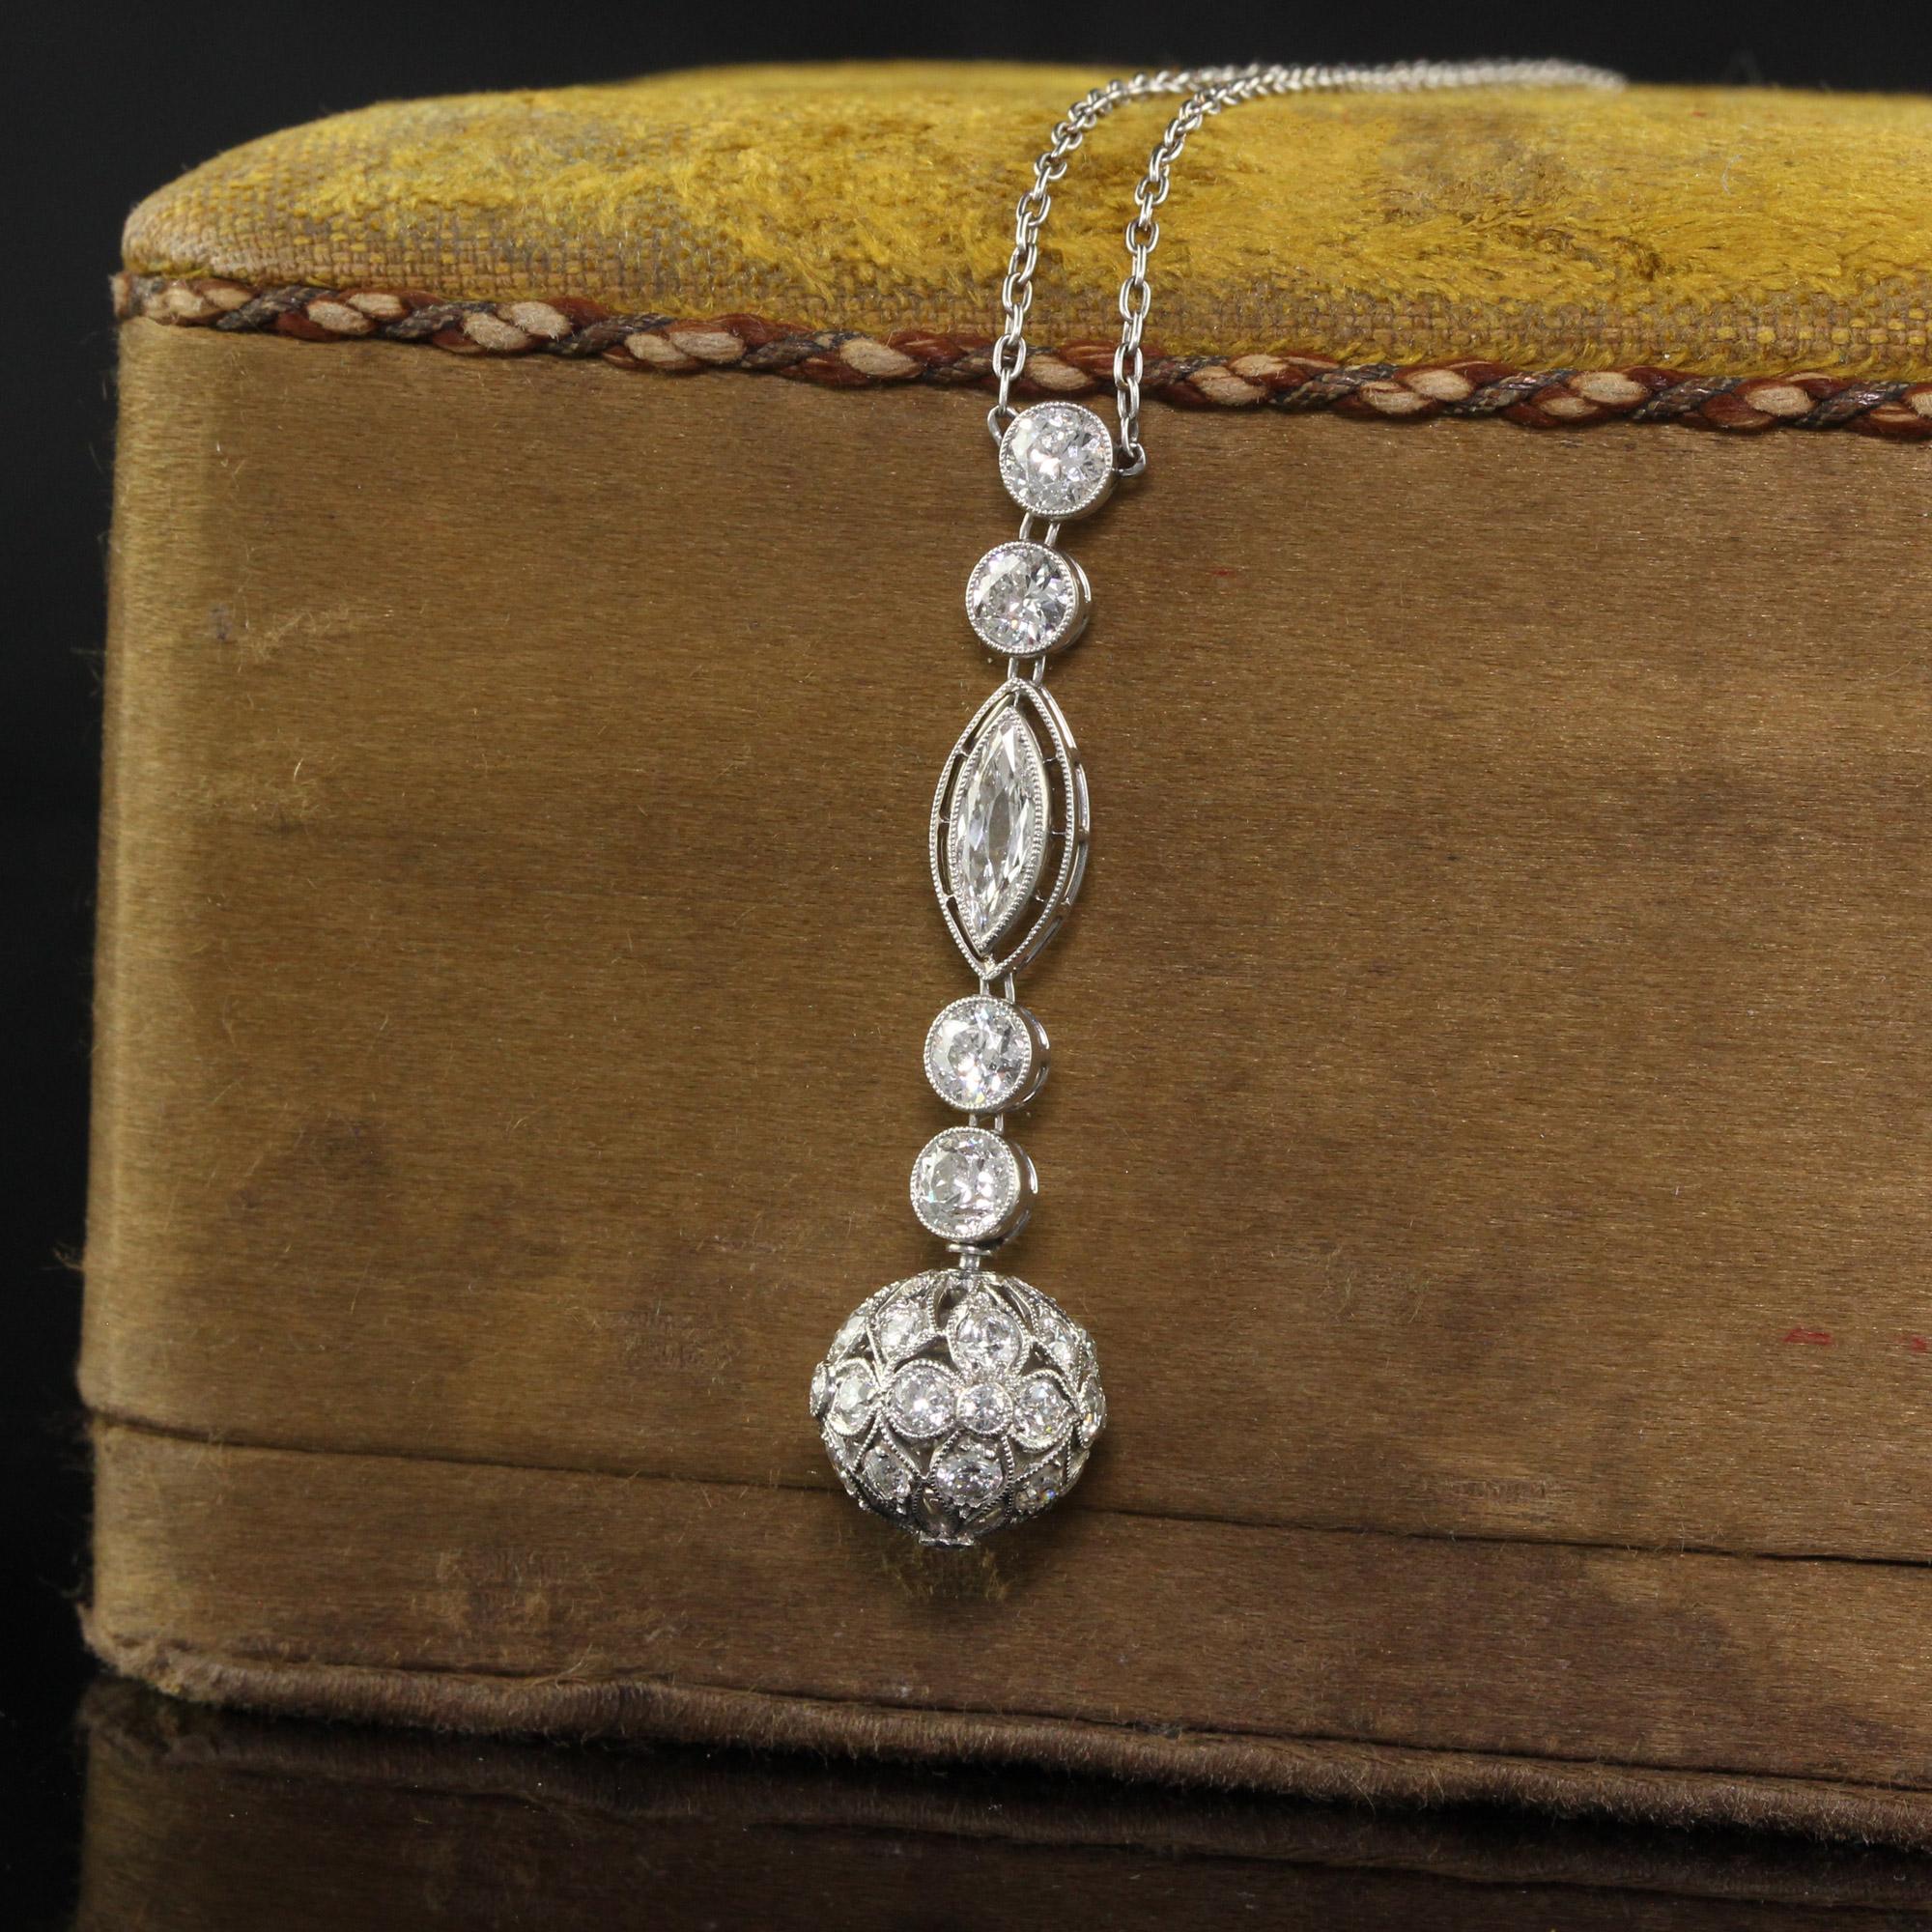 Beautiful Antique Edwardian Platinum Old Euro Diamond Drop Pendant Necklace. This gorgeous drop pendant necklace is crafted in platinum. The pendant has old European cut diamonds and an old marquise in the center. The ball on the bottom of the